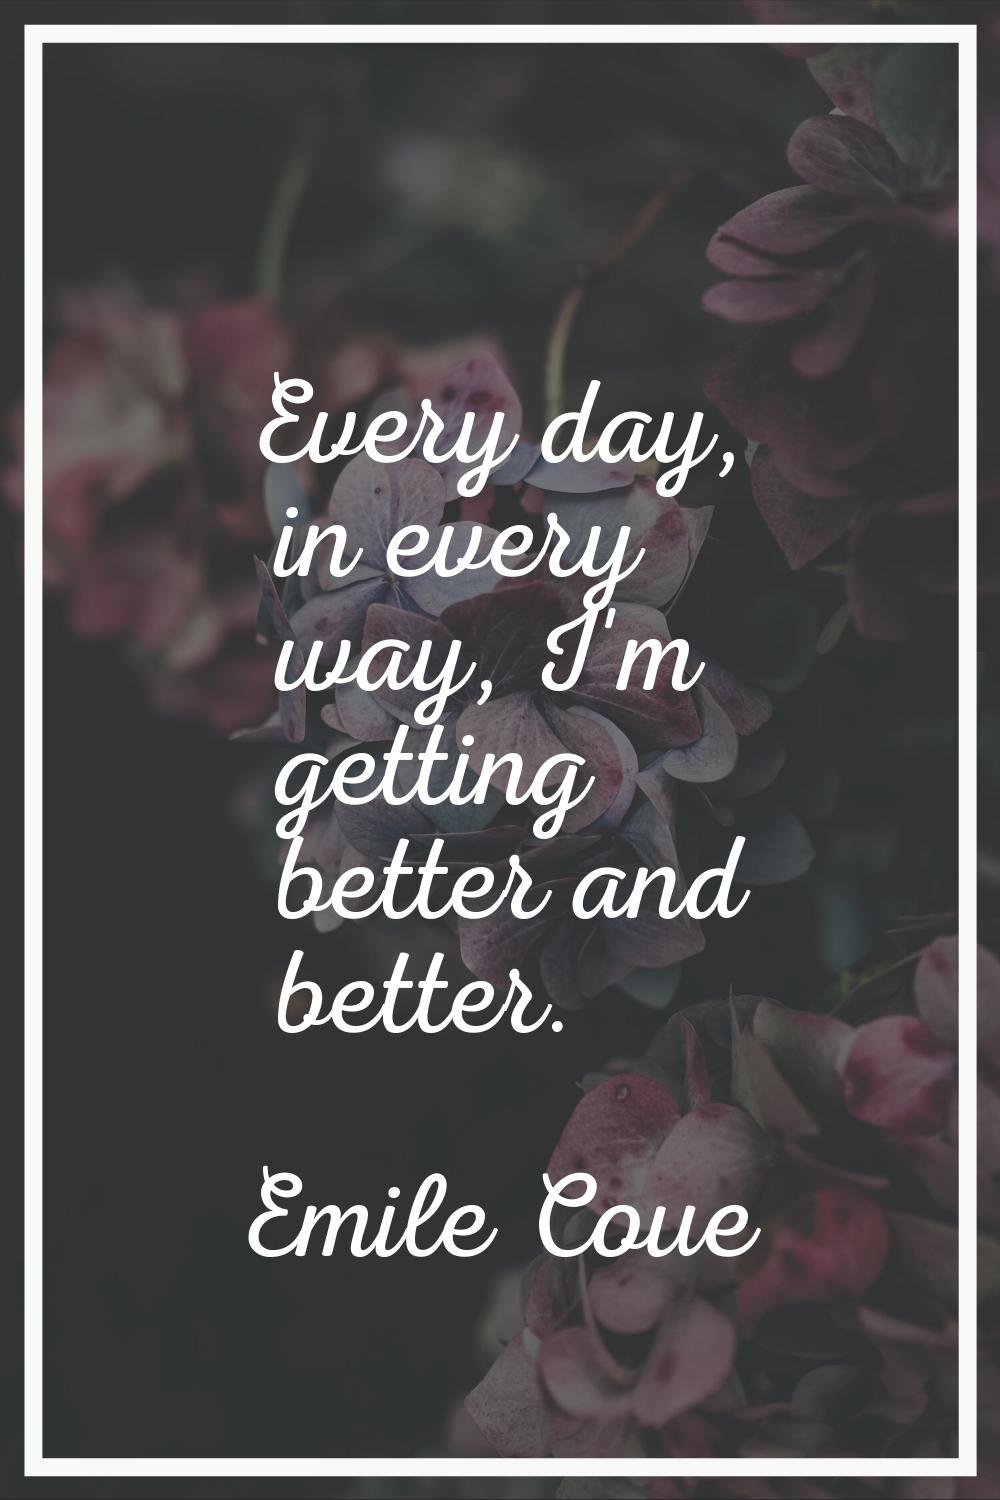 Every day, in every way, I'm getting better and better.